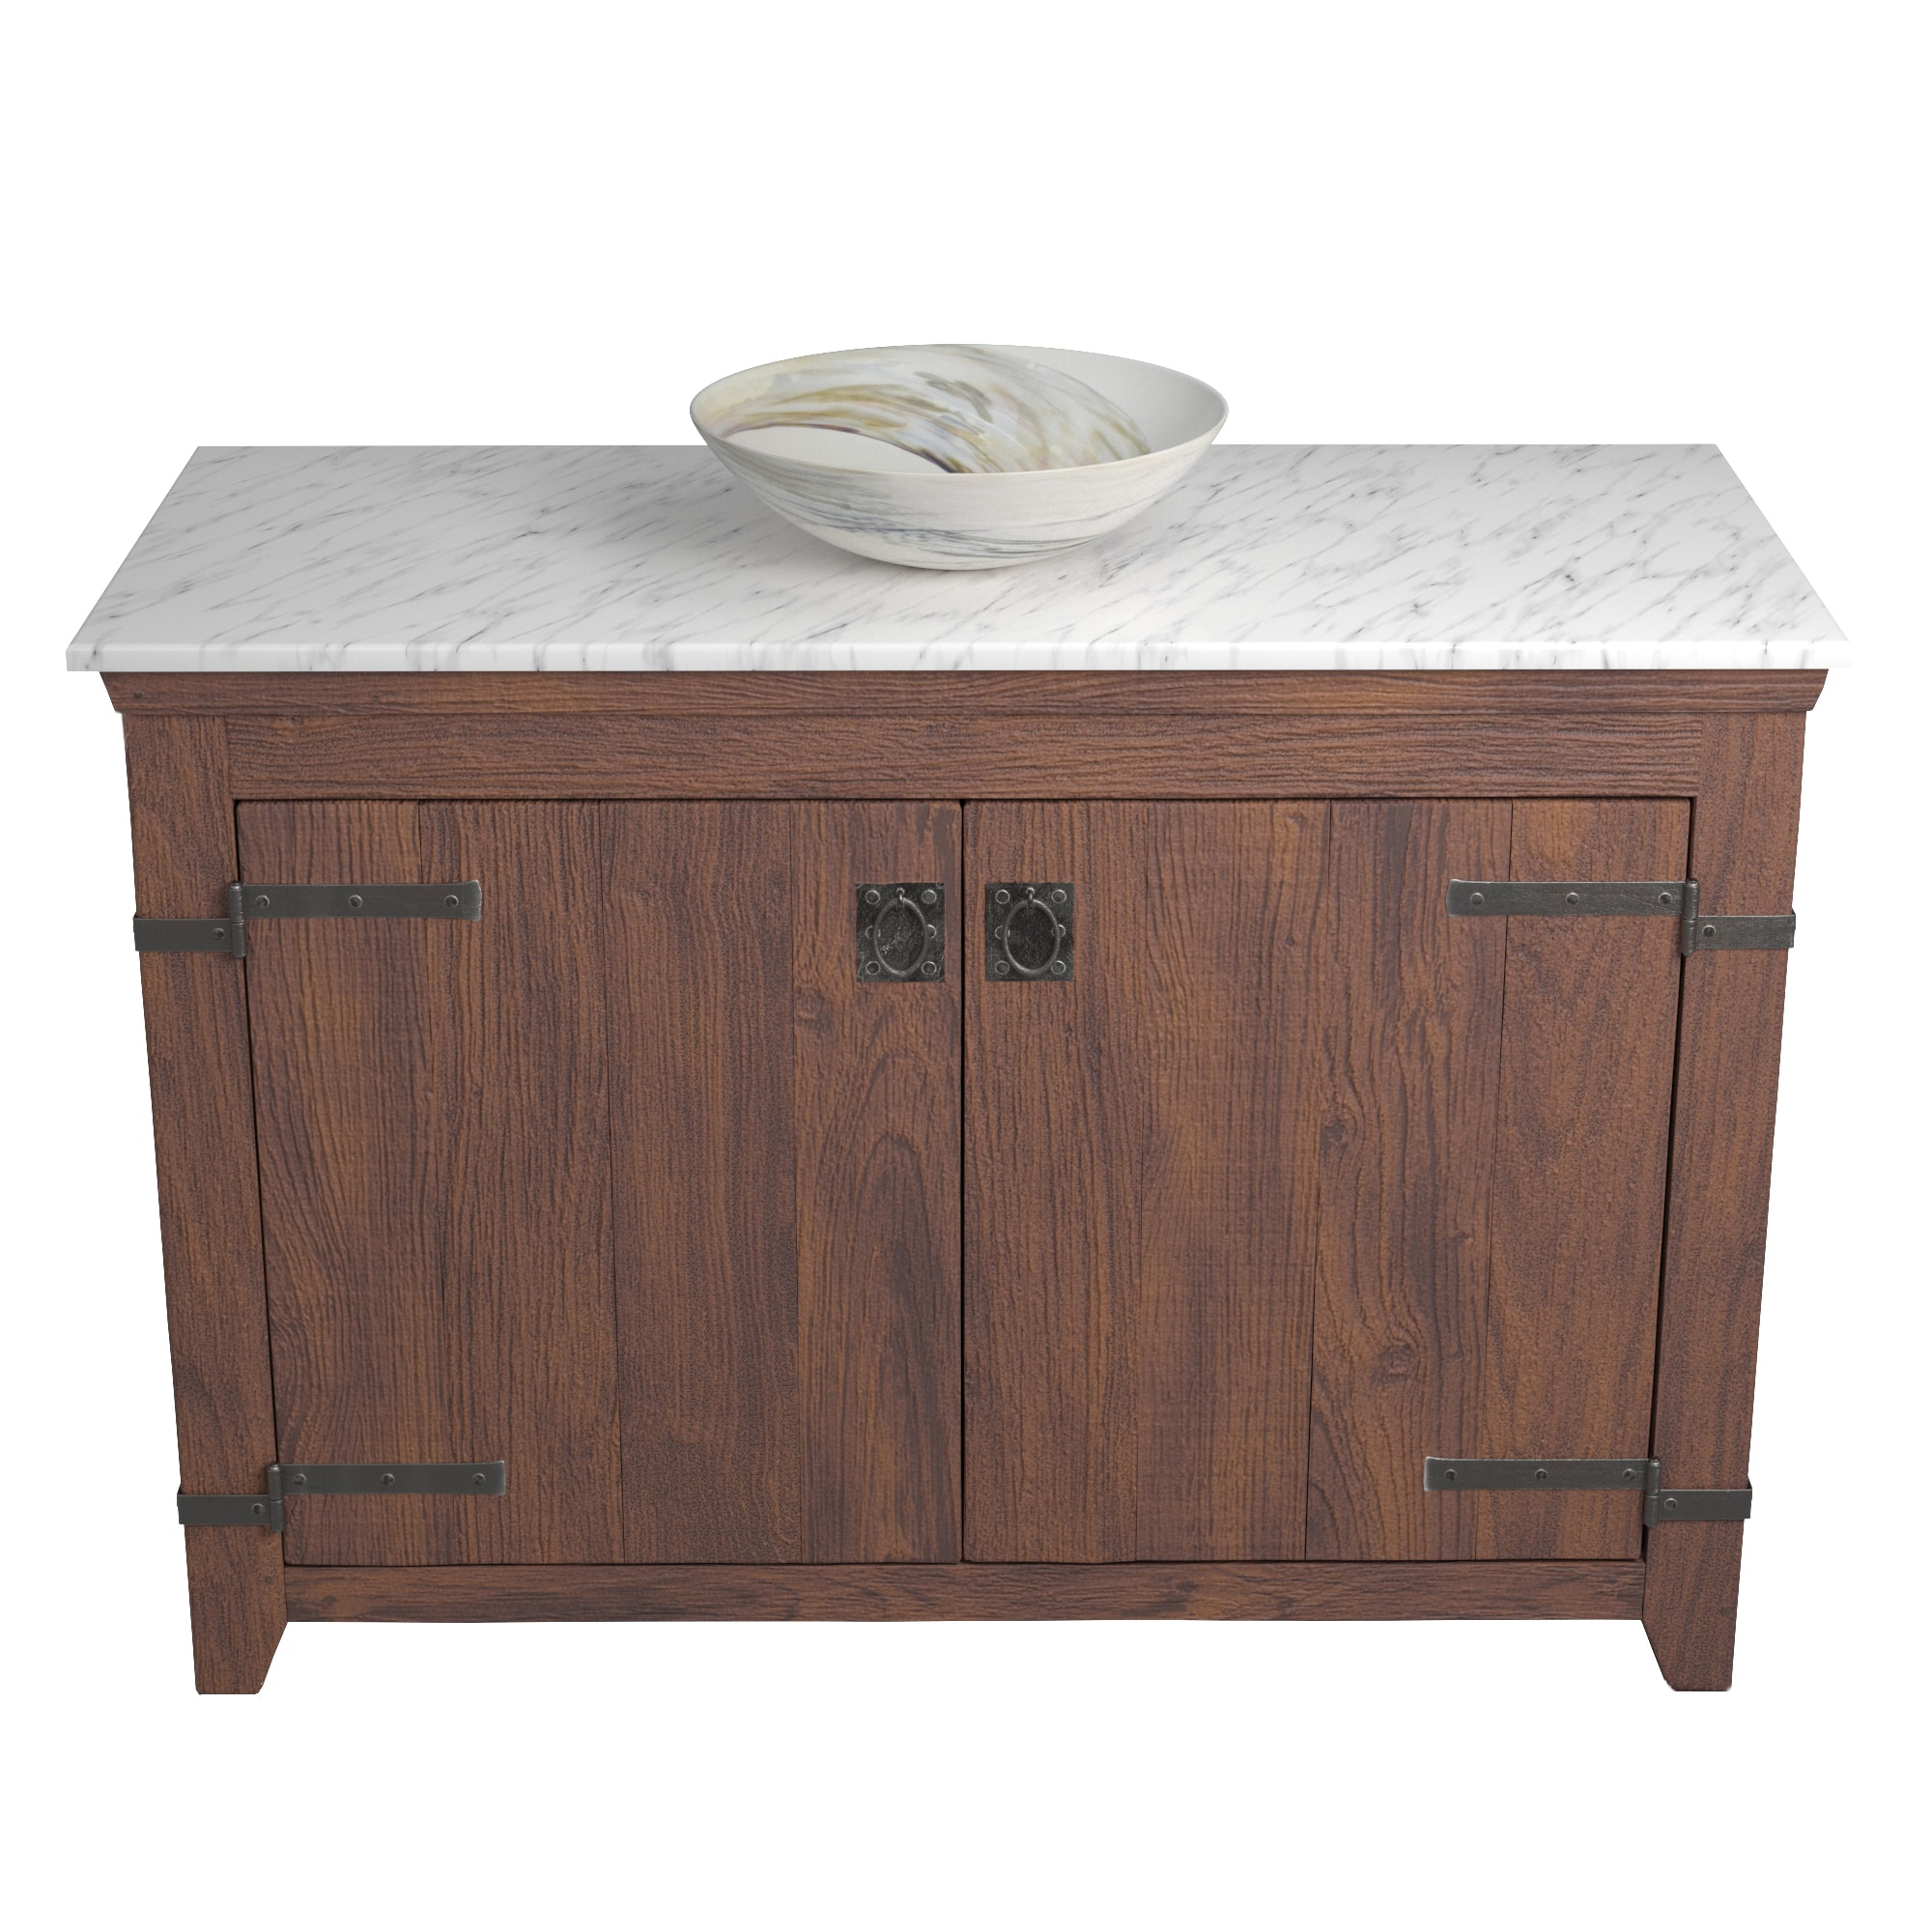 Native Trails 48" Americana Vanity in Chestnut with Carrara Marble Top and Verona in Abalone, No Faucet Hole, BND48-VB-CT-MG-060